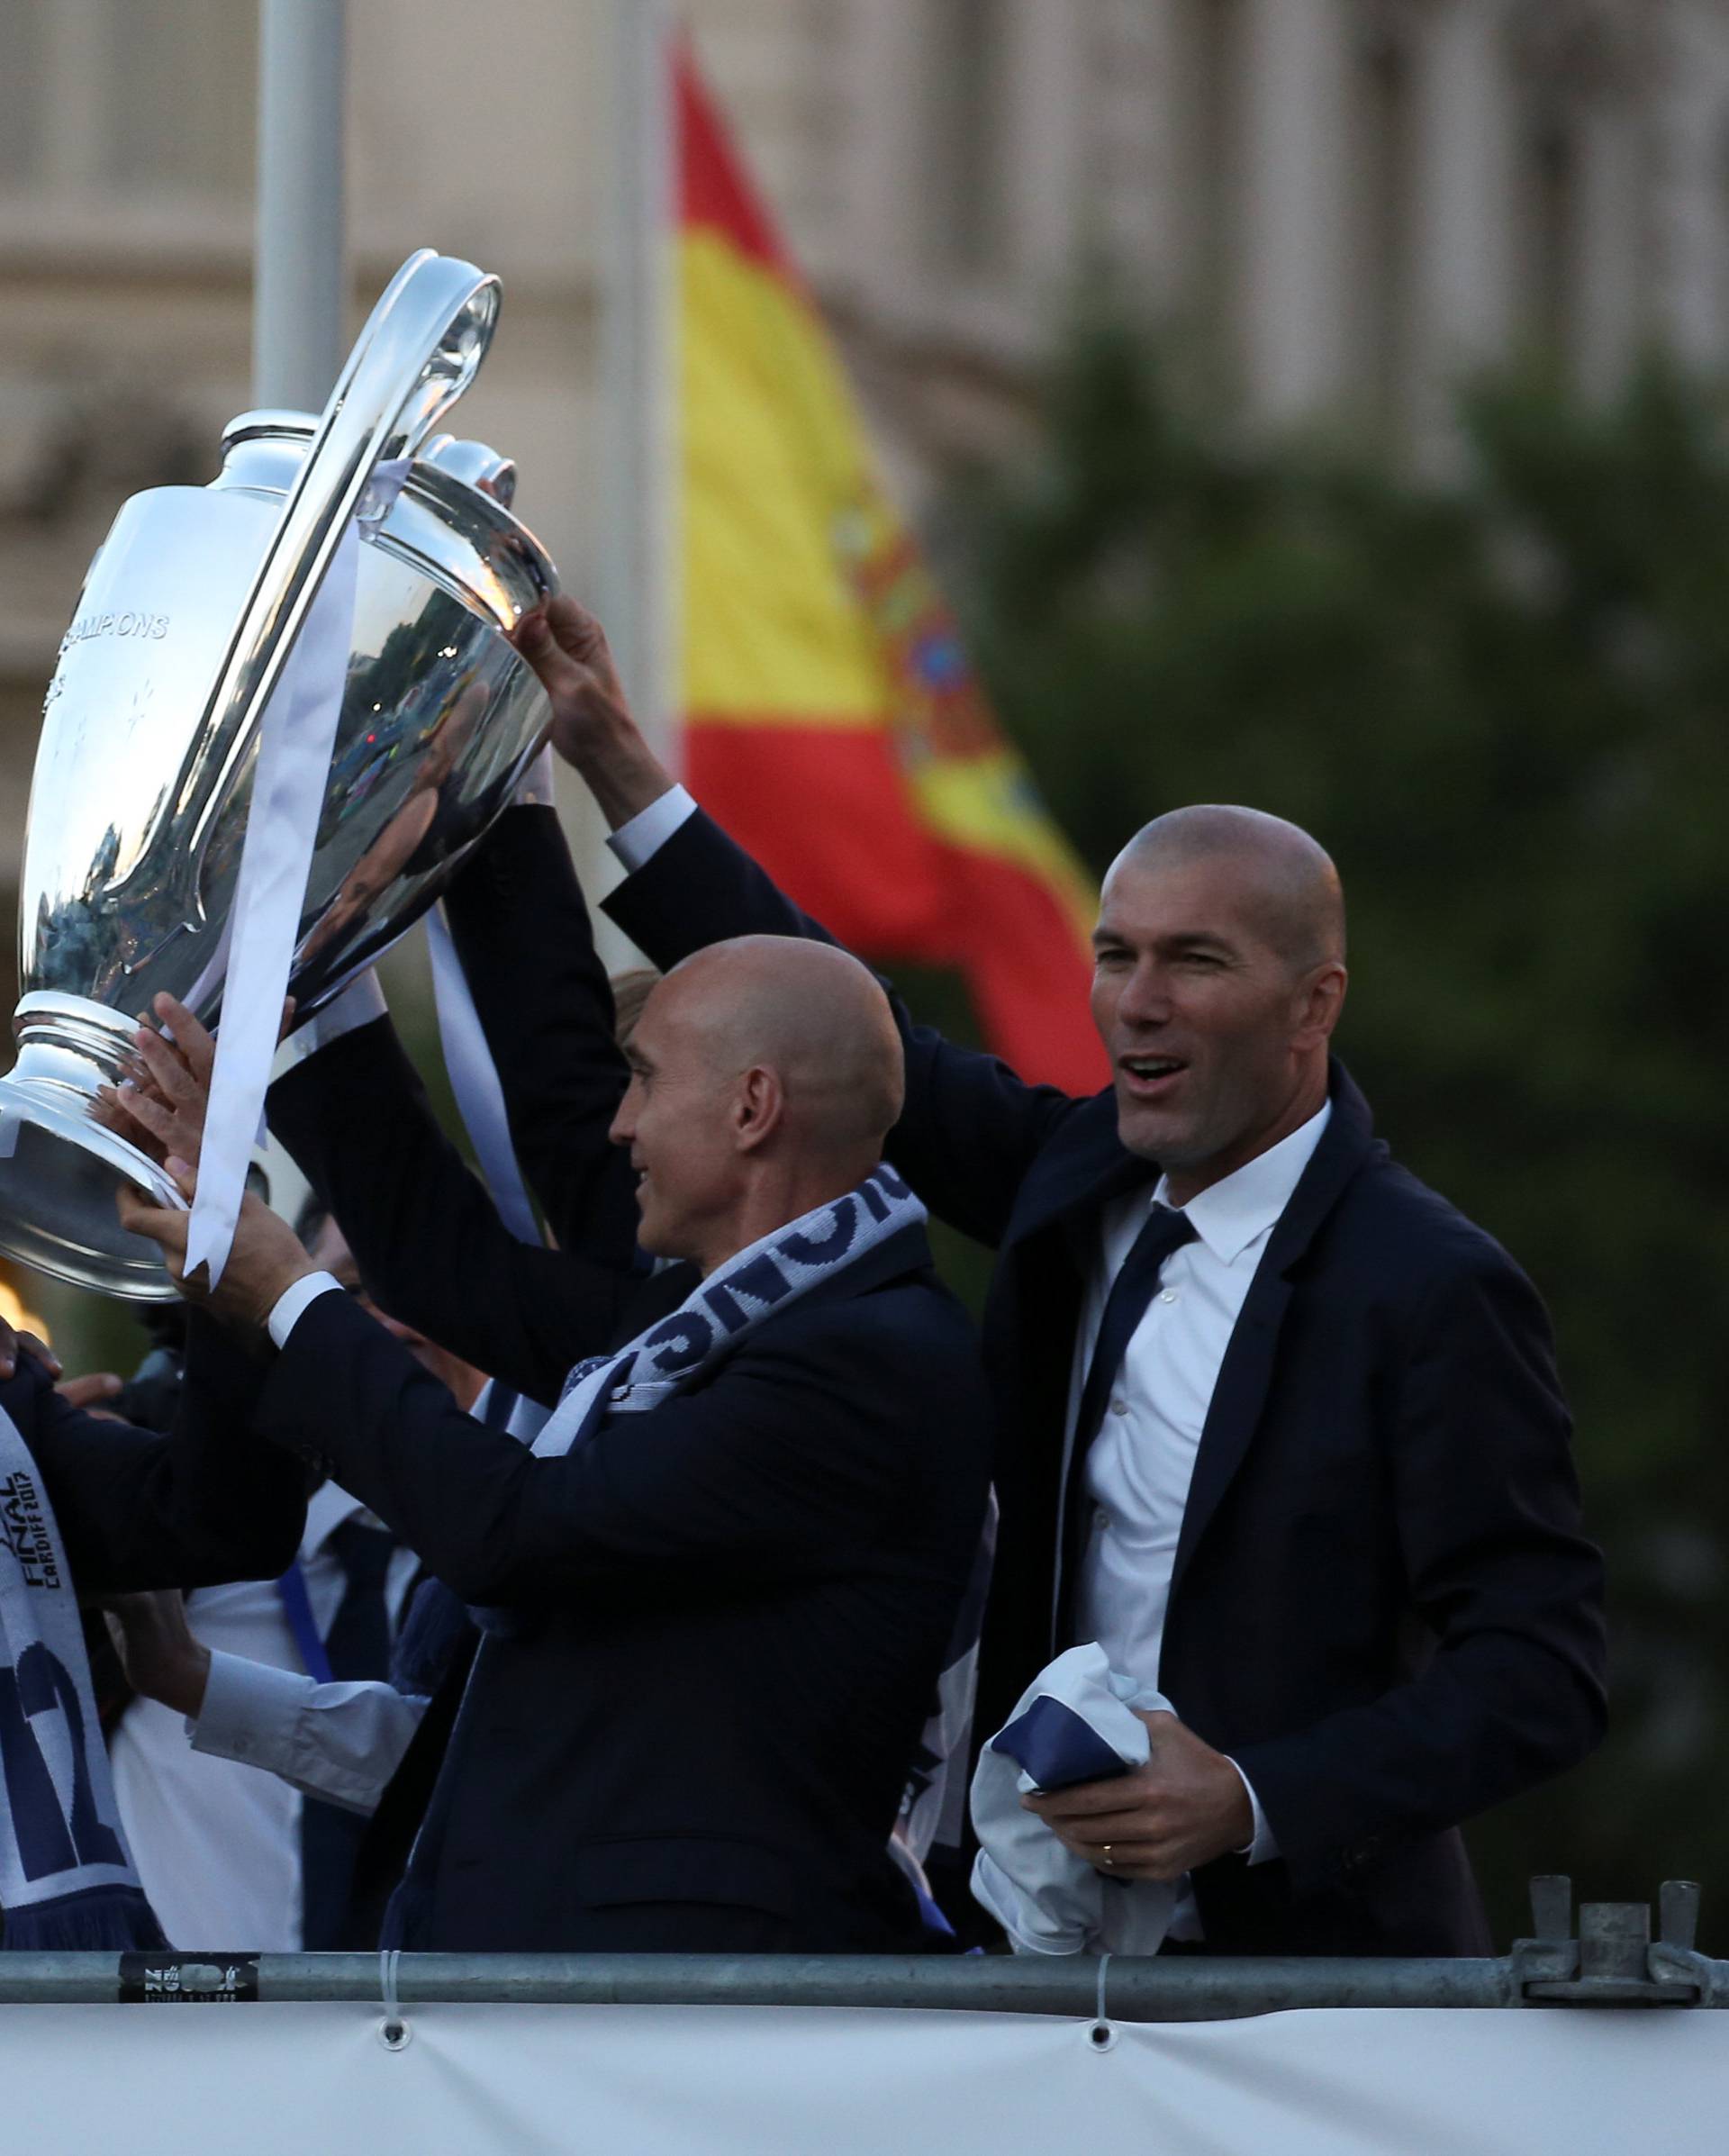 Real Madrid's coach Zidane and his staff celebrate Champions League title at Cibeles Fountain in Madrid